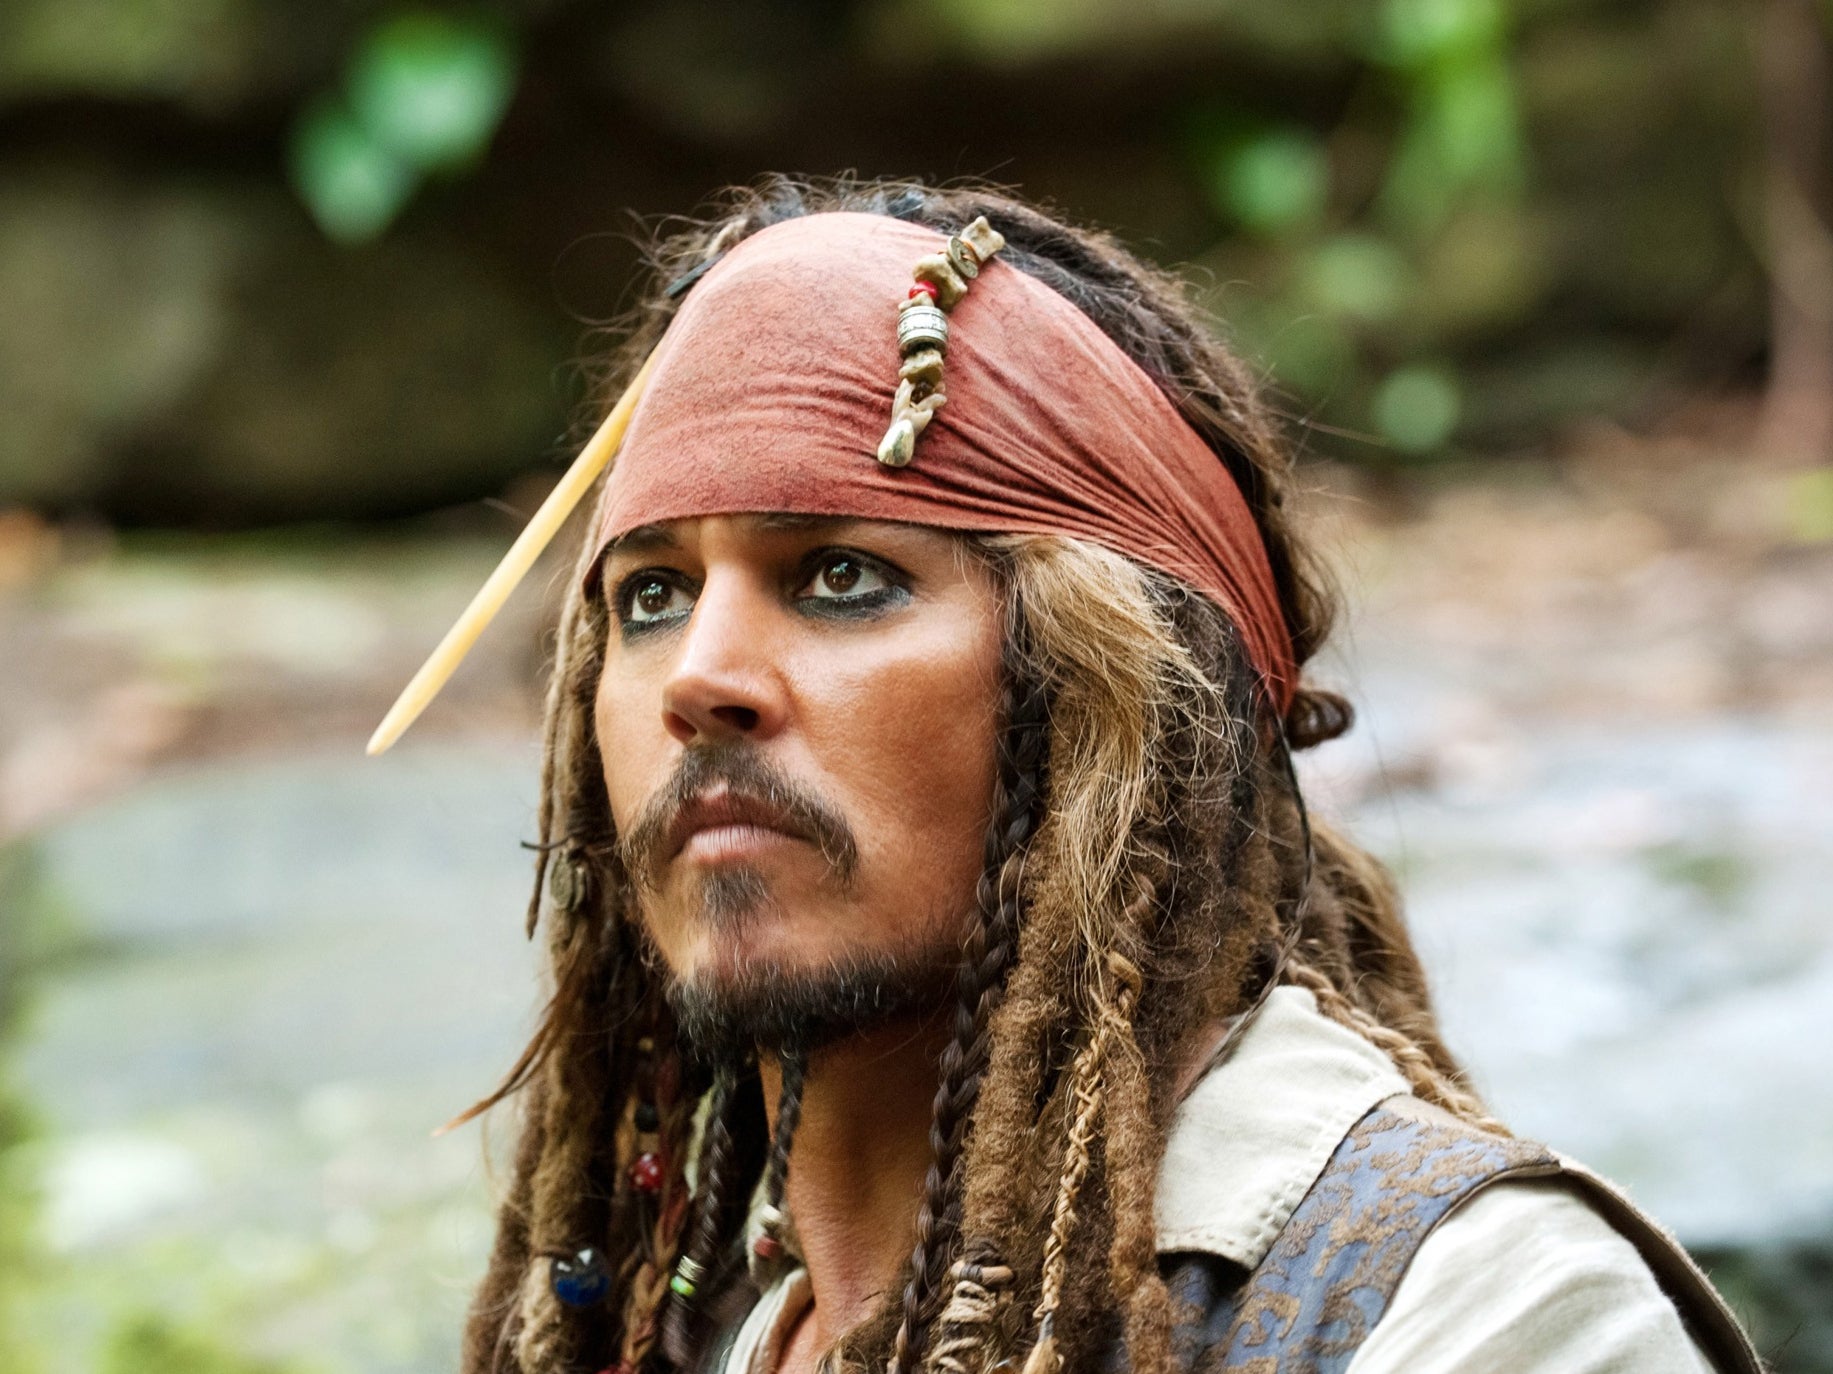 Johnny Depp in ‘Pirates of the Caribbean’